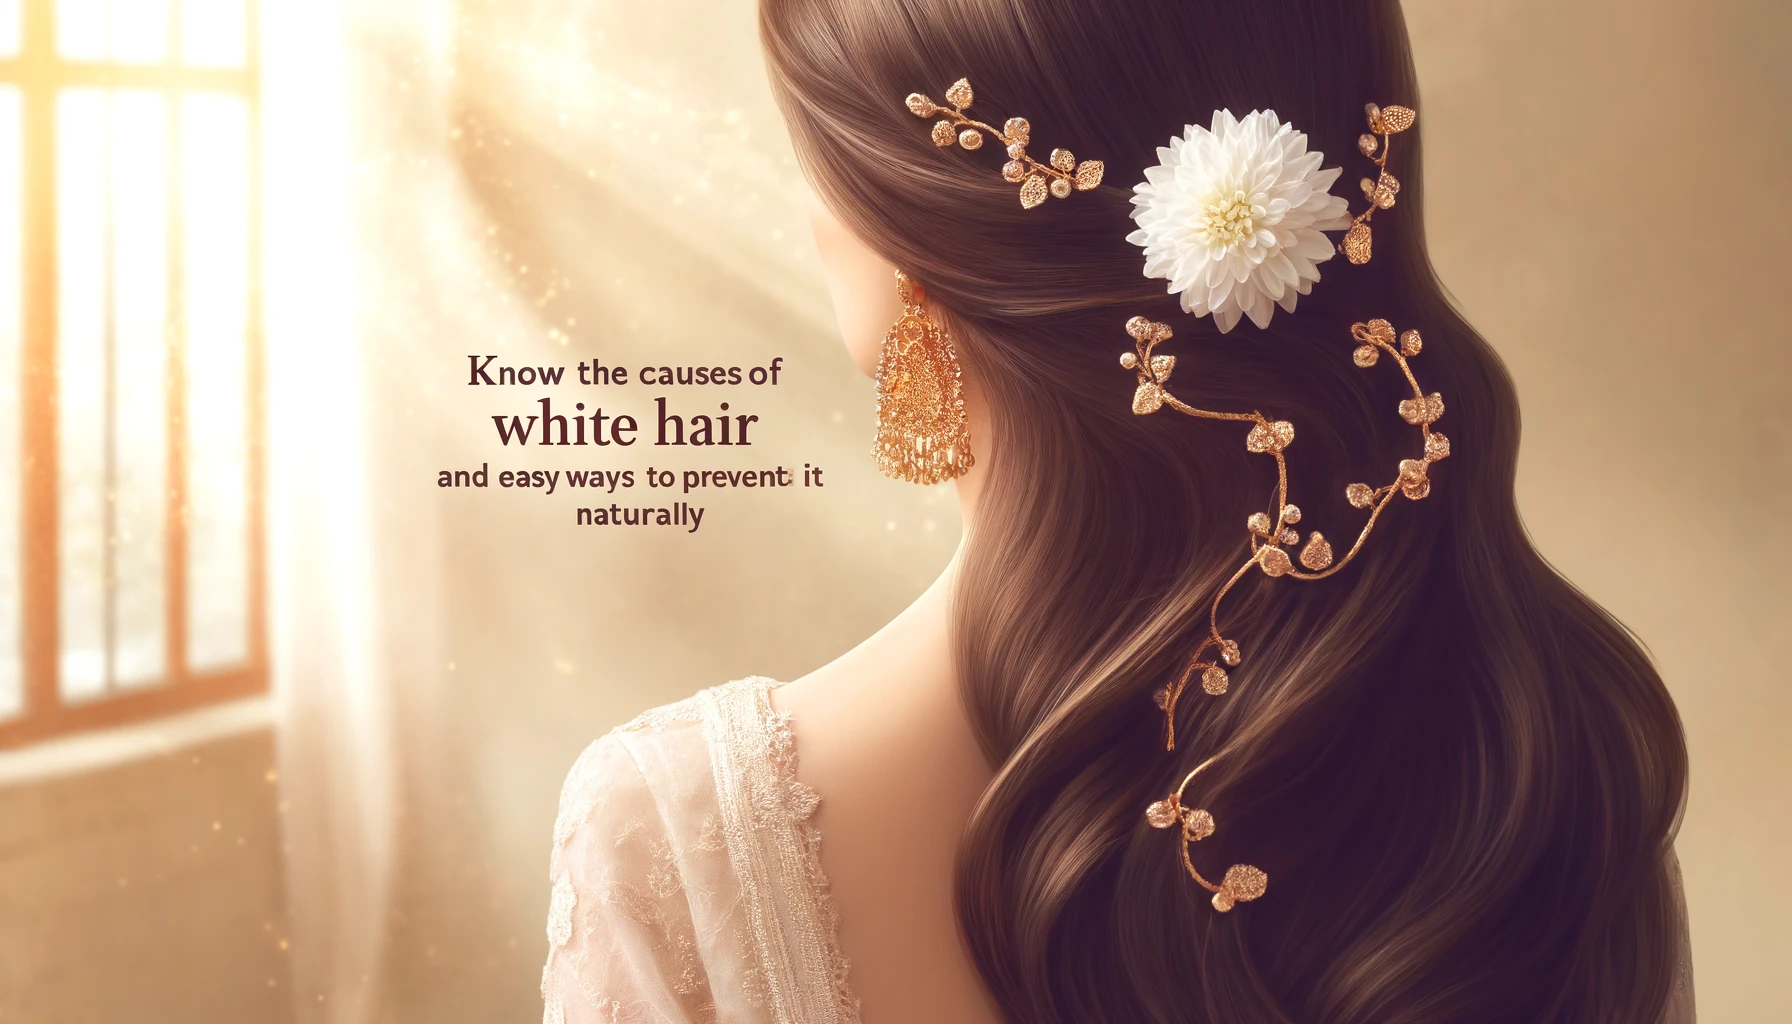 Know the causes of white hair and easy ways to prevent it naturally